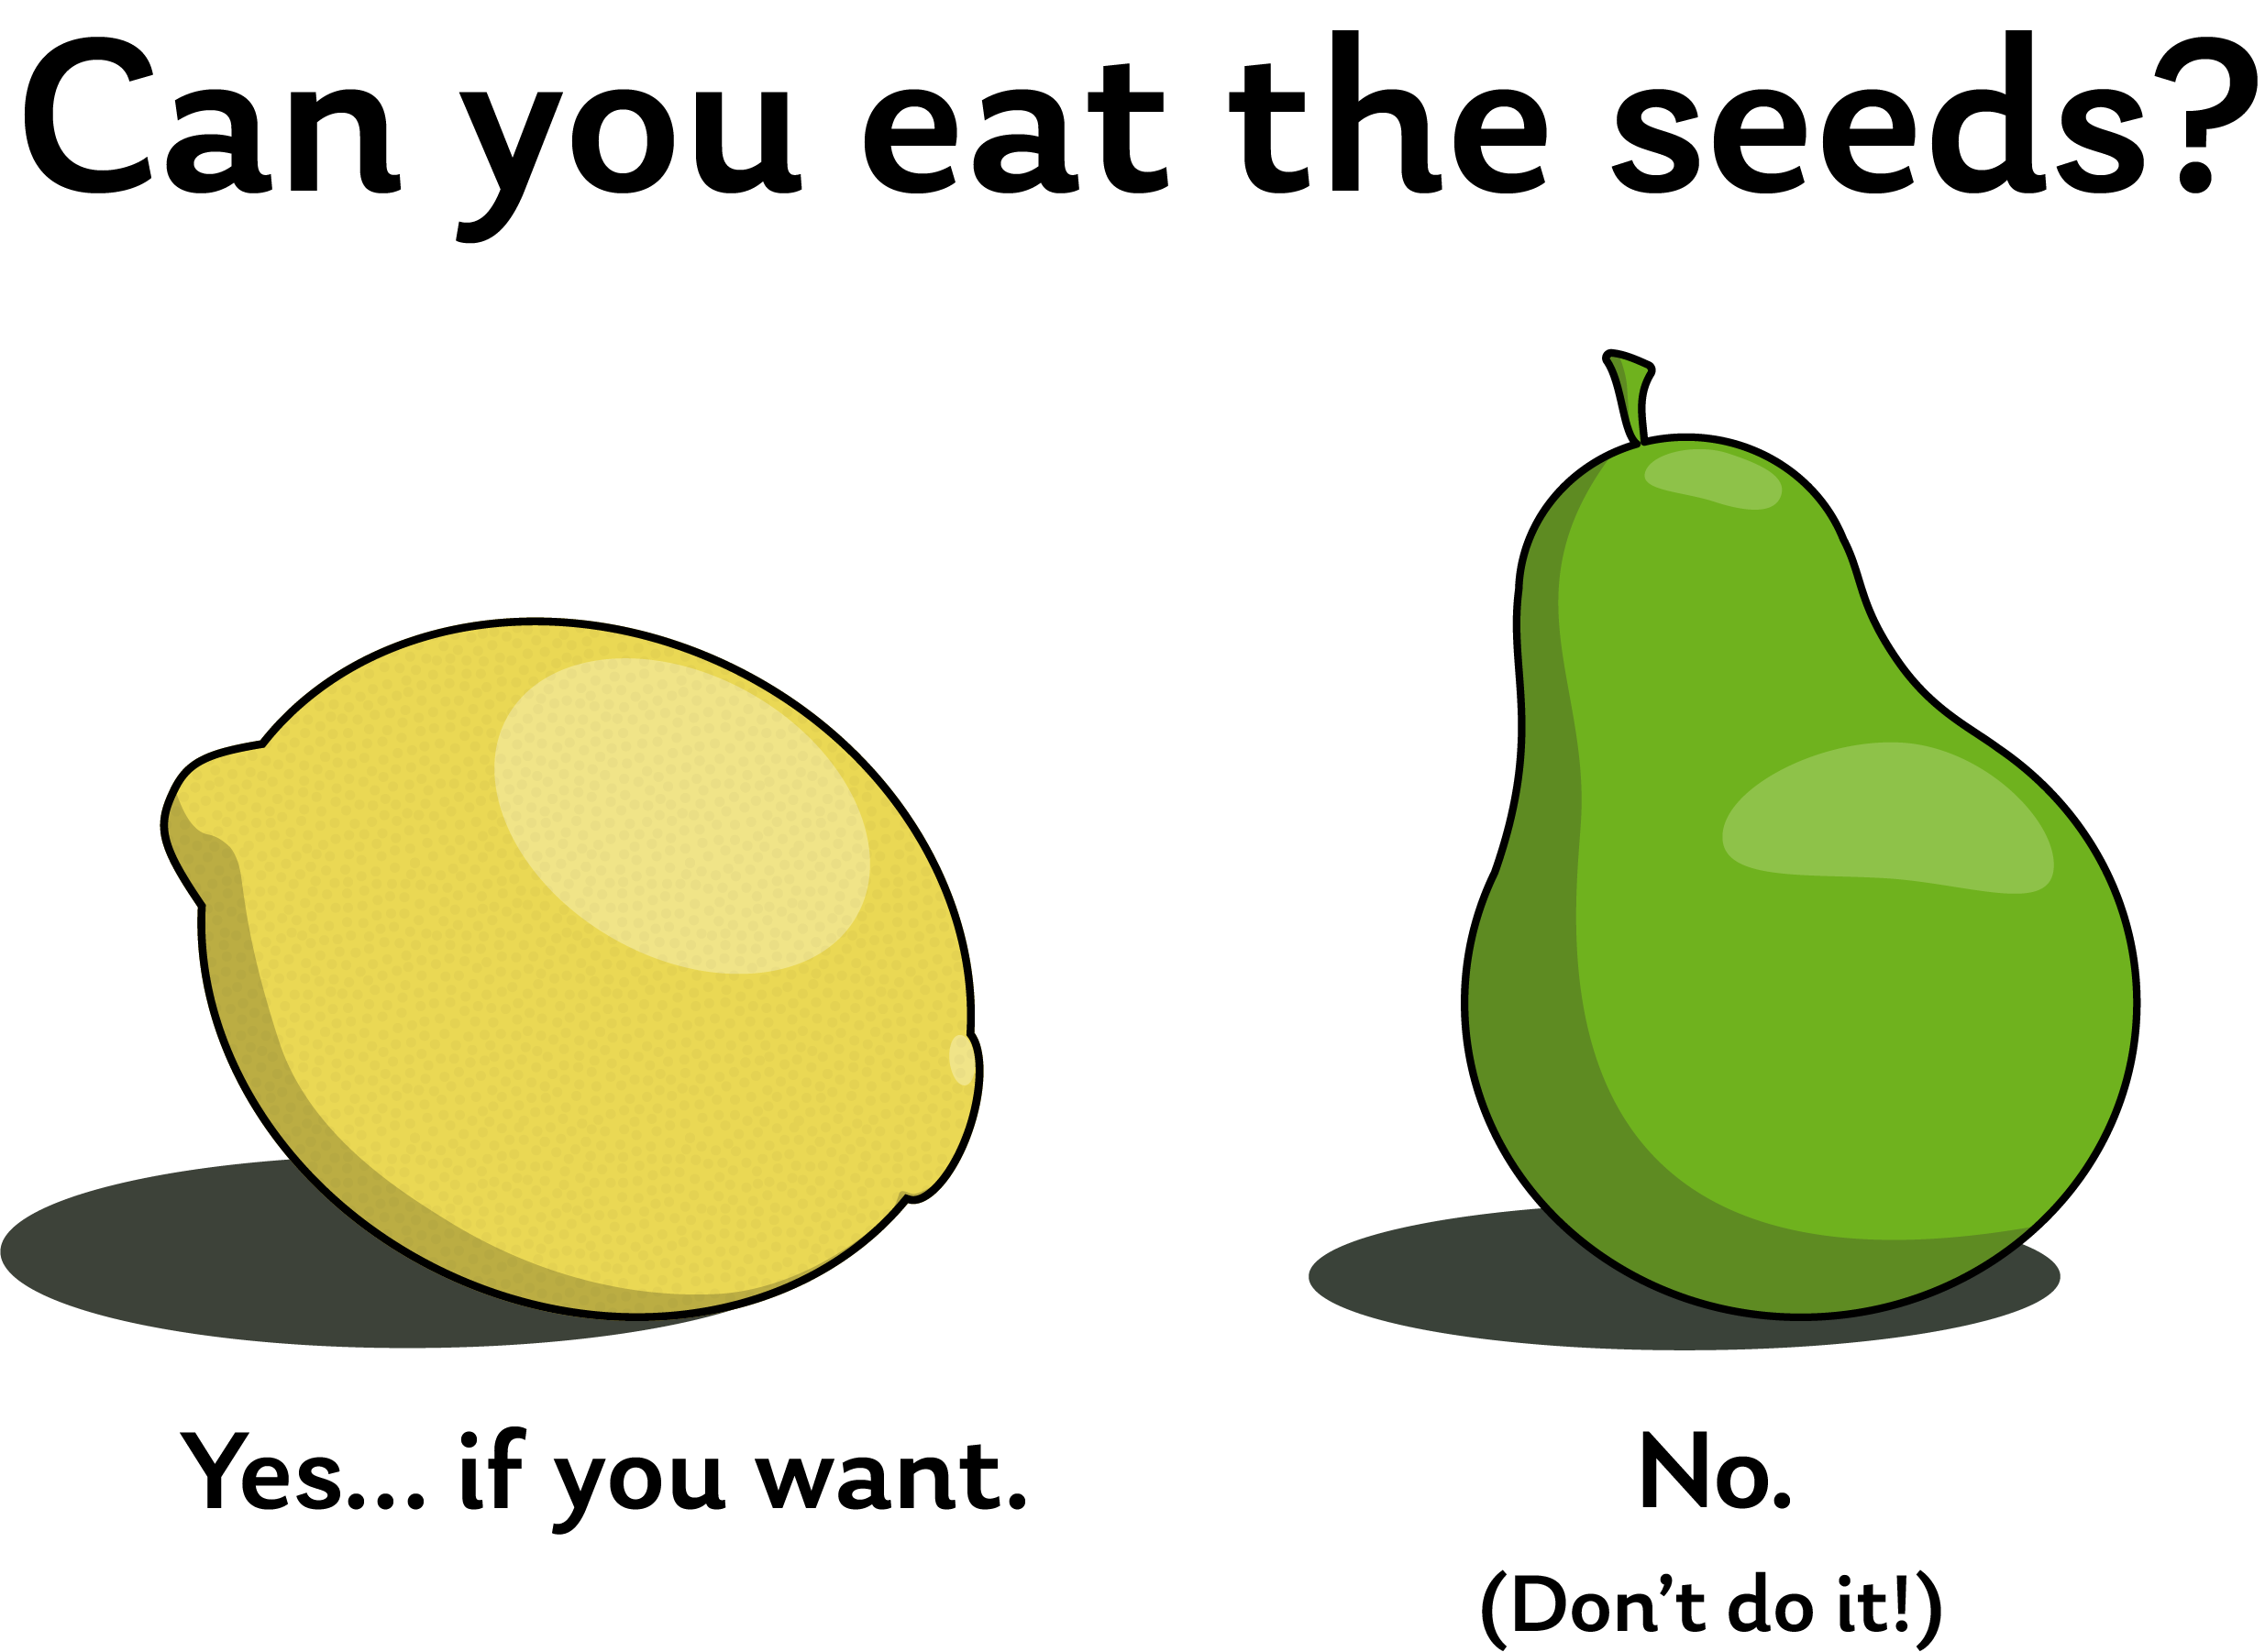 An image with a question: "Can you eat the seeds?" alongside a lemon (whose seeds are safe to eat) and a pear (whose seeds are not).